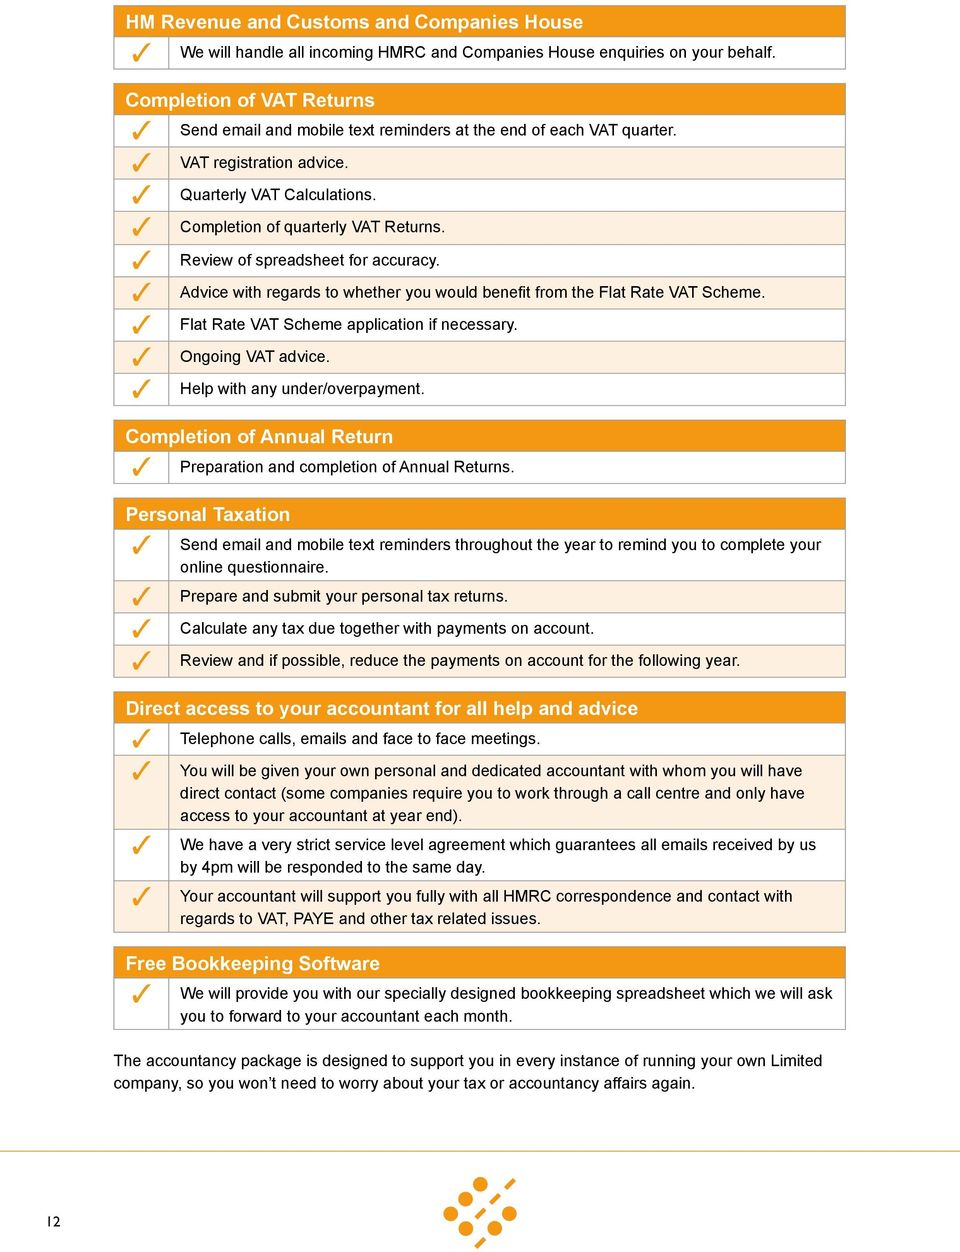 Sjd Accountancy Spreadsheet within Contractor S Guide. To Running Your Own Limited Company.  Pdf